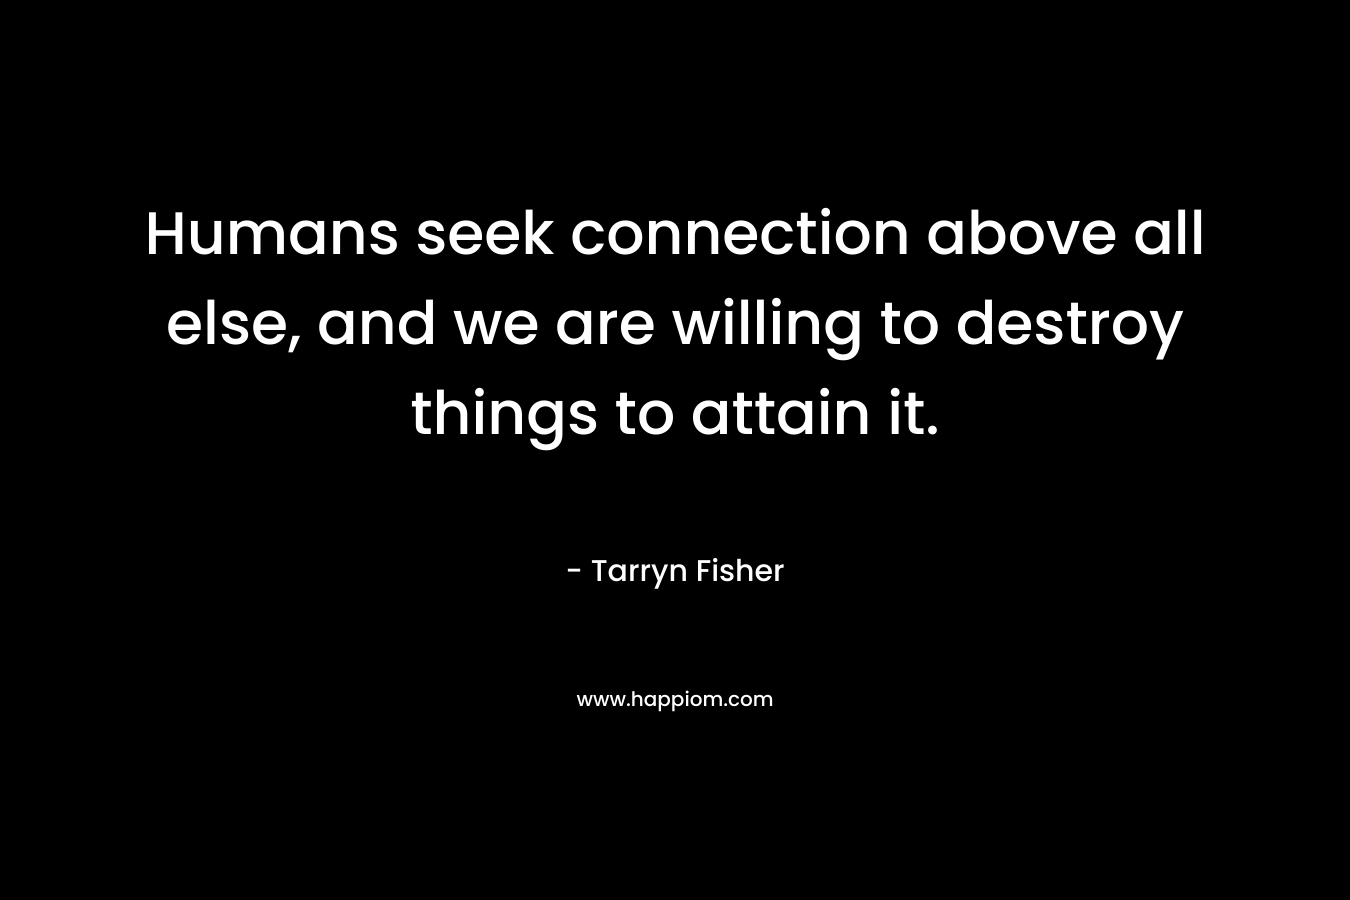 Humans seek connection above all else, and we are willing to destroy things to attain it.